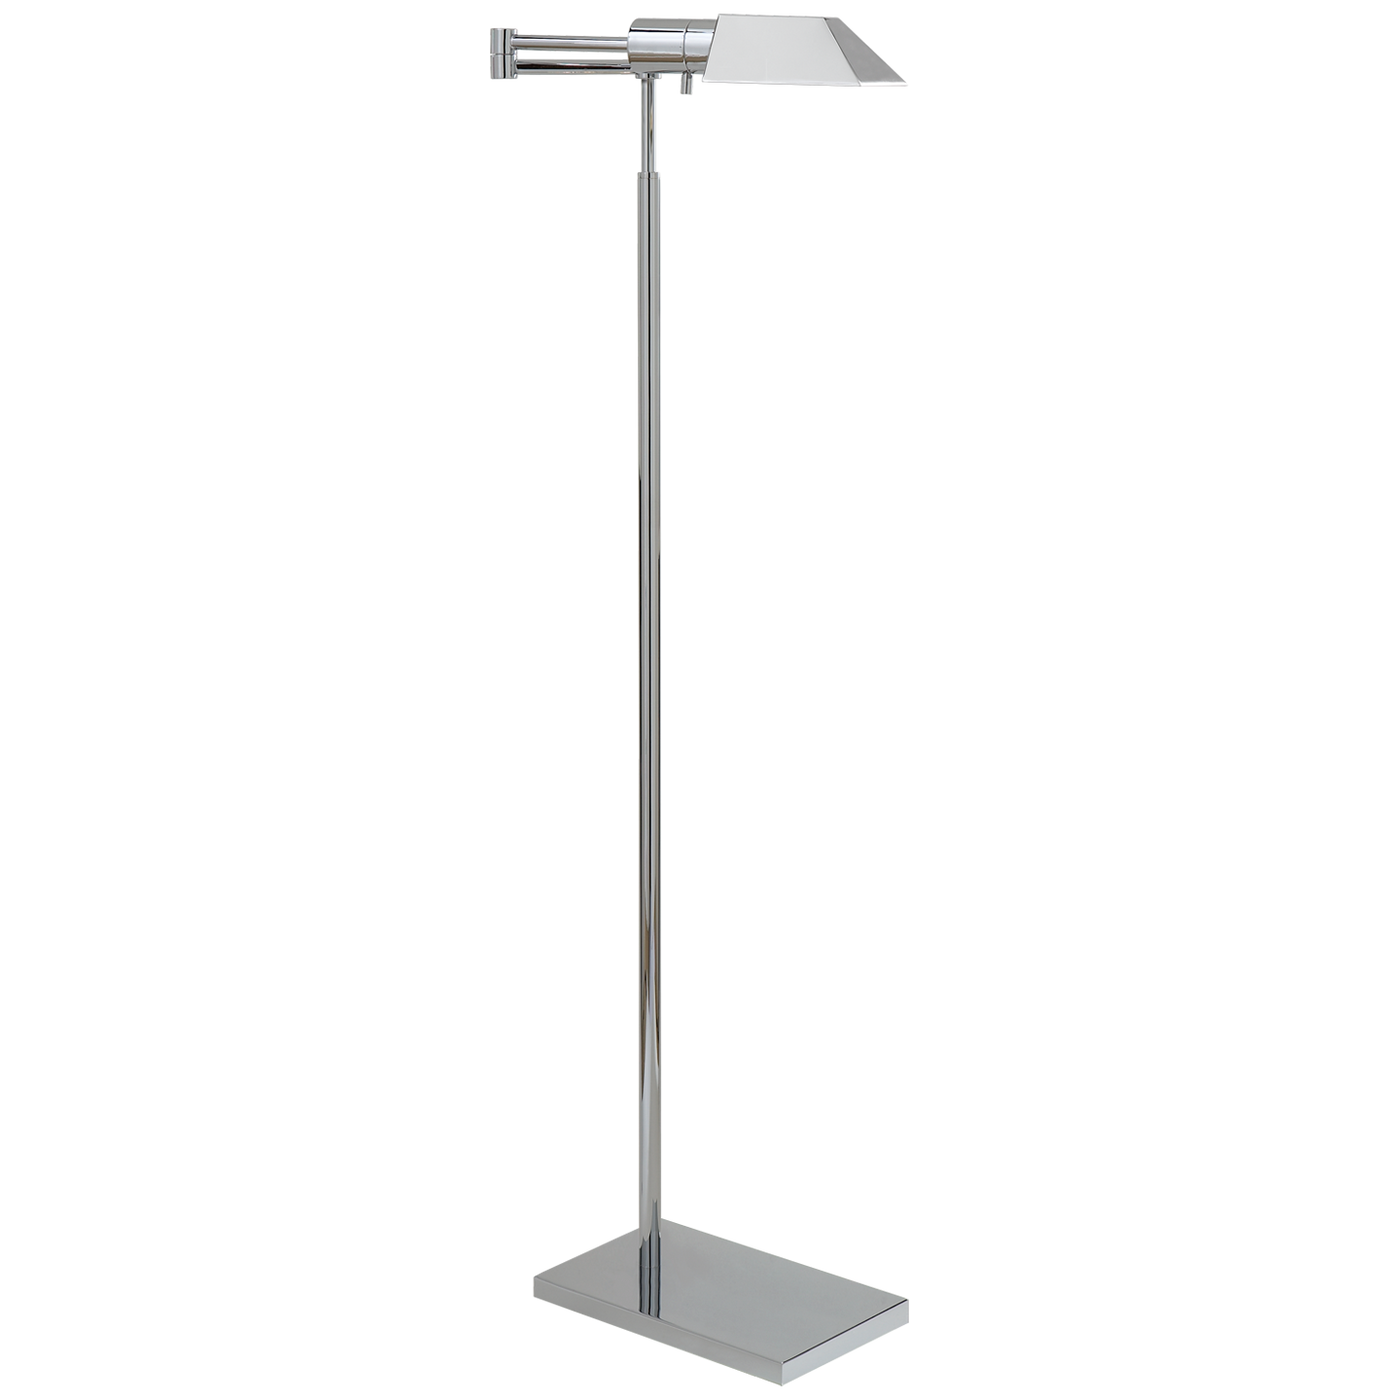 FLOOR LAMP STUDIO SWING ARM (Available in 3 Finishes)